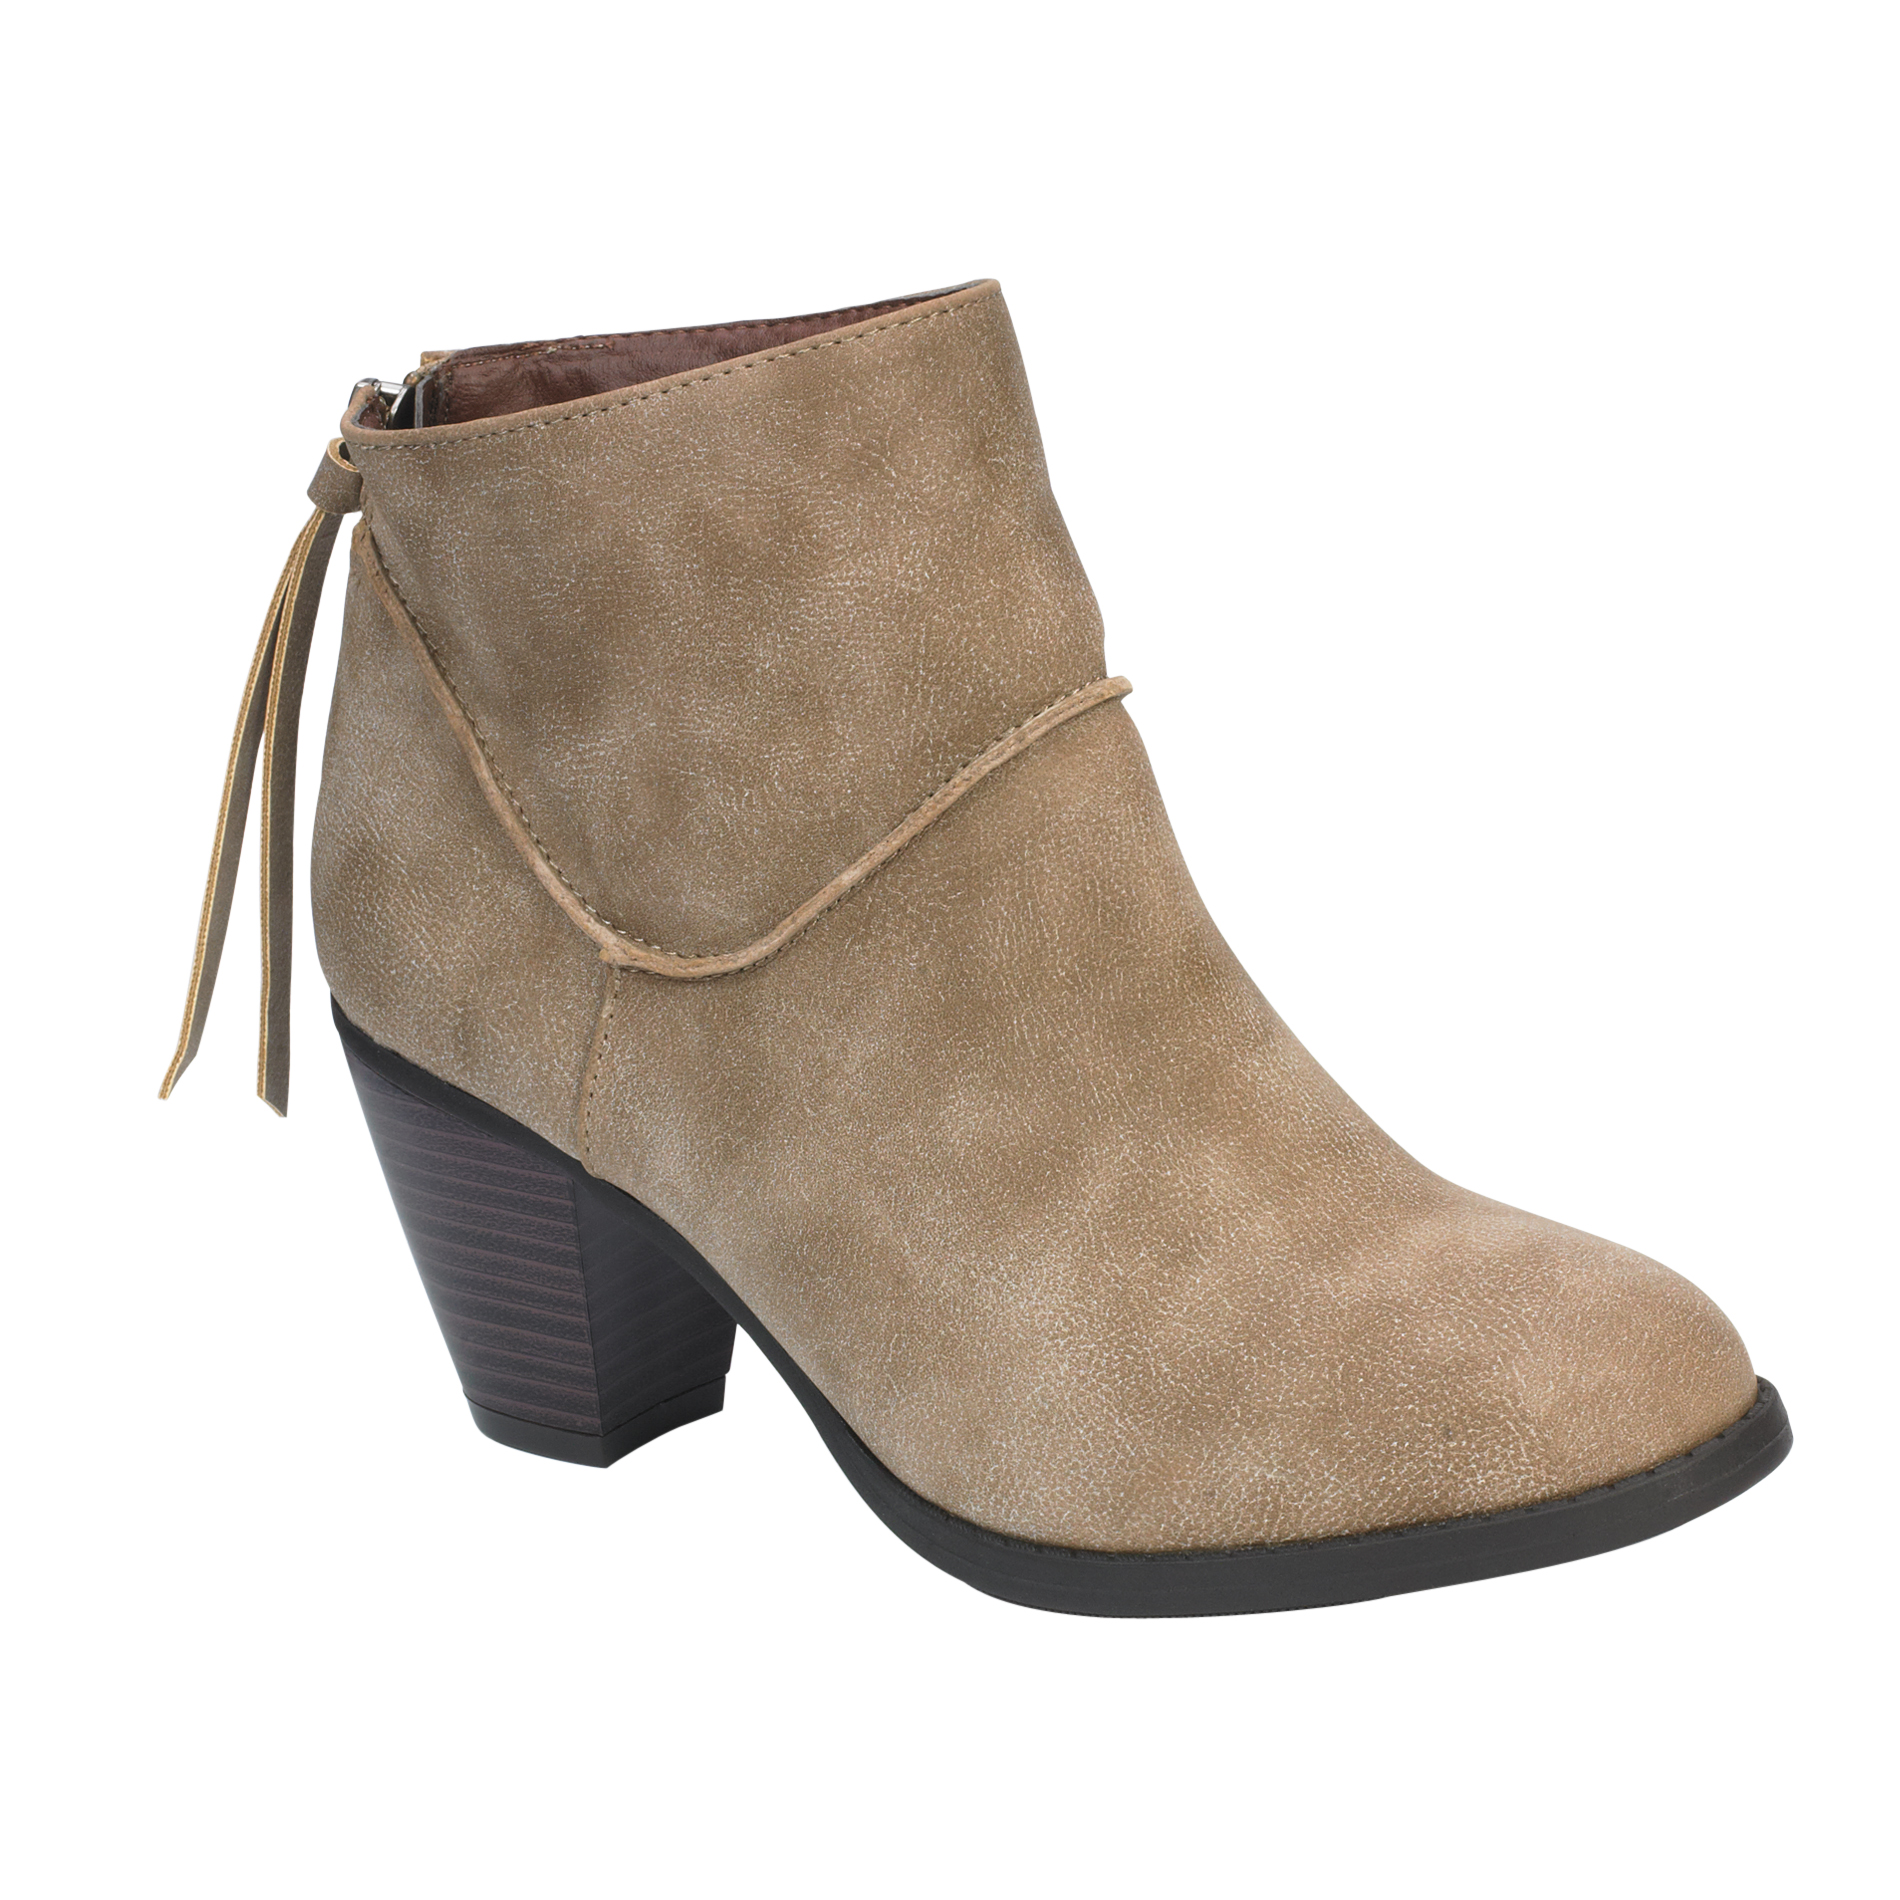 SM New York Women's Fashion Bootie Marie - Taupe